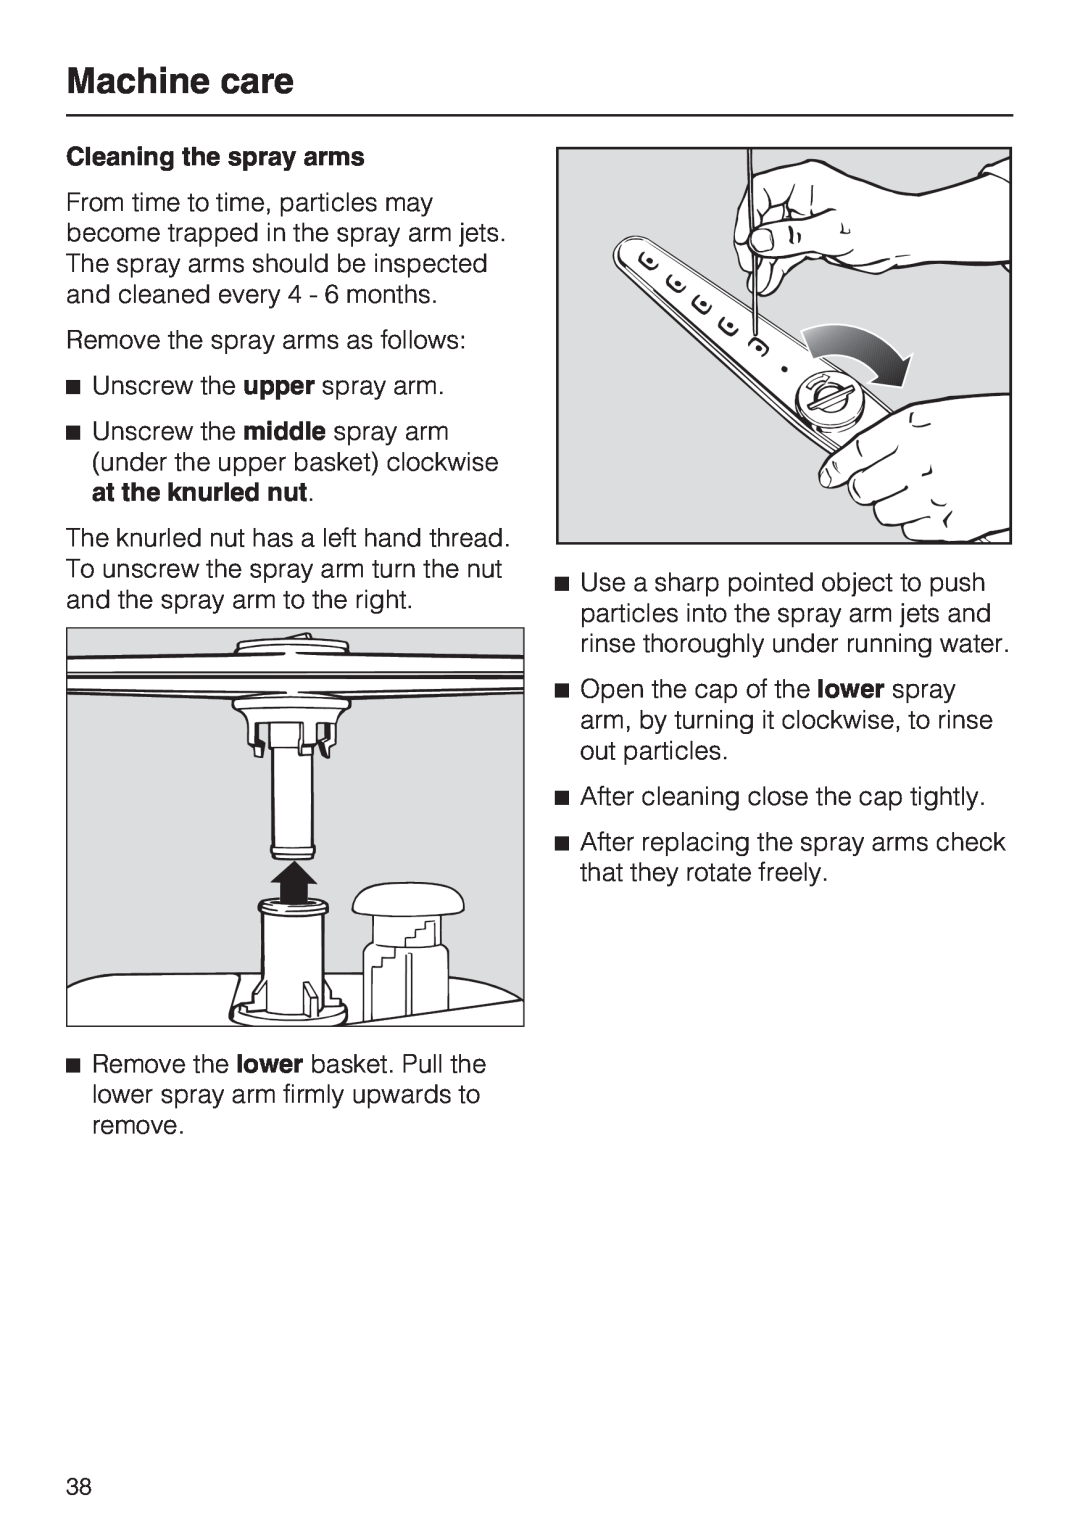 Miele G 7856, 06 868 521 installation instructions Machine care, Cleaning the spray arms 